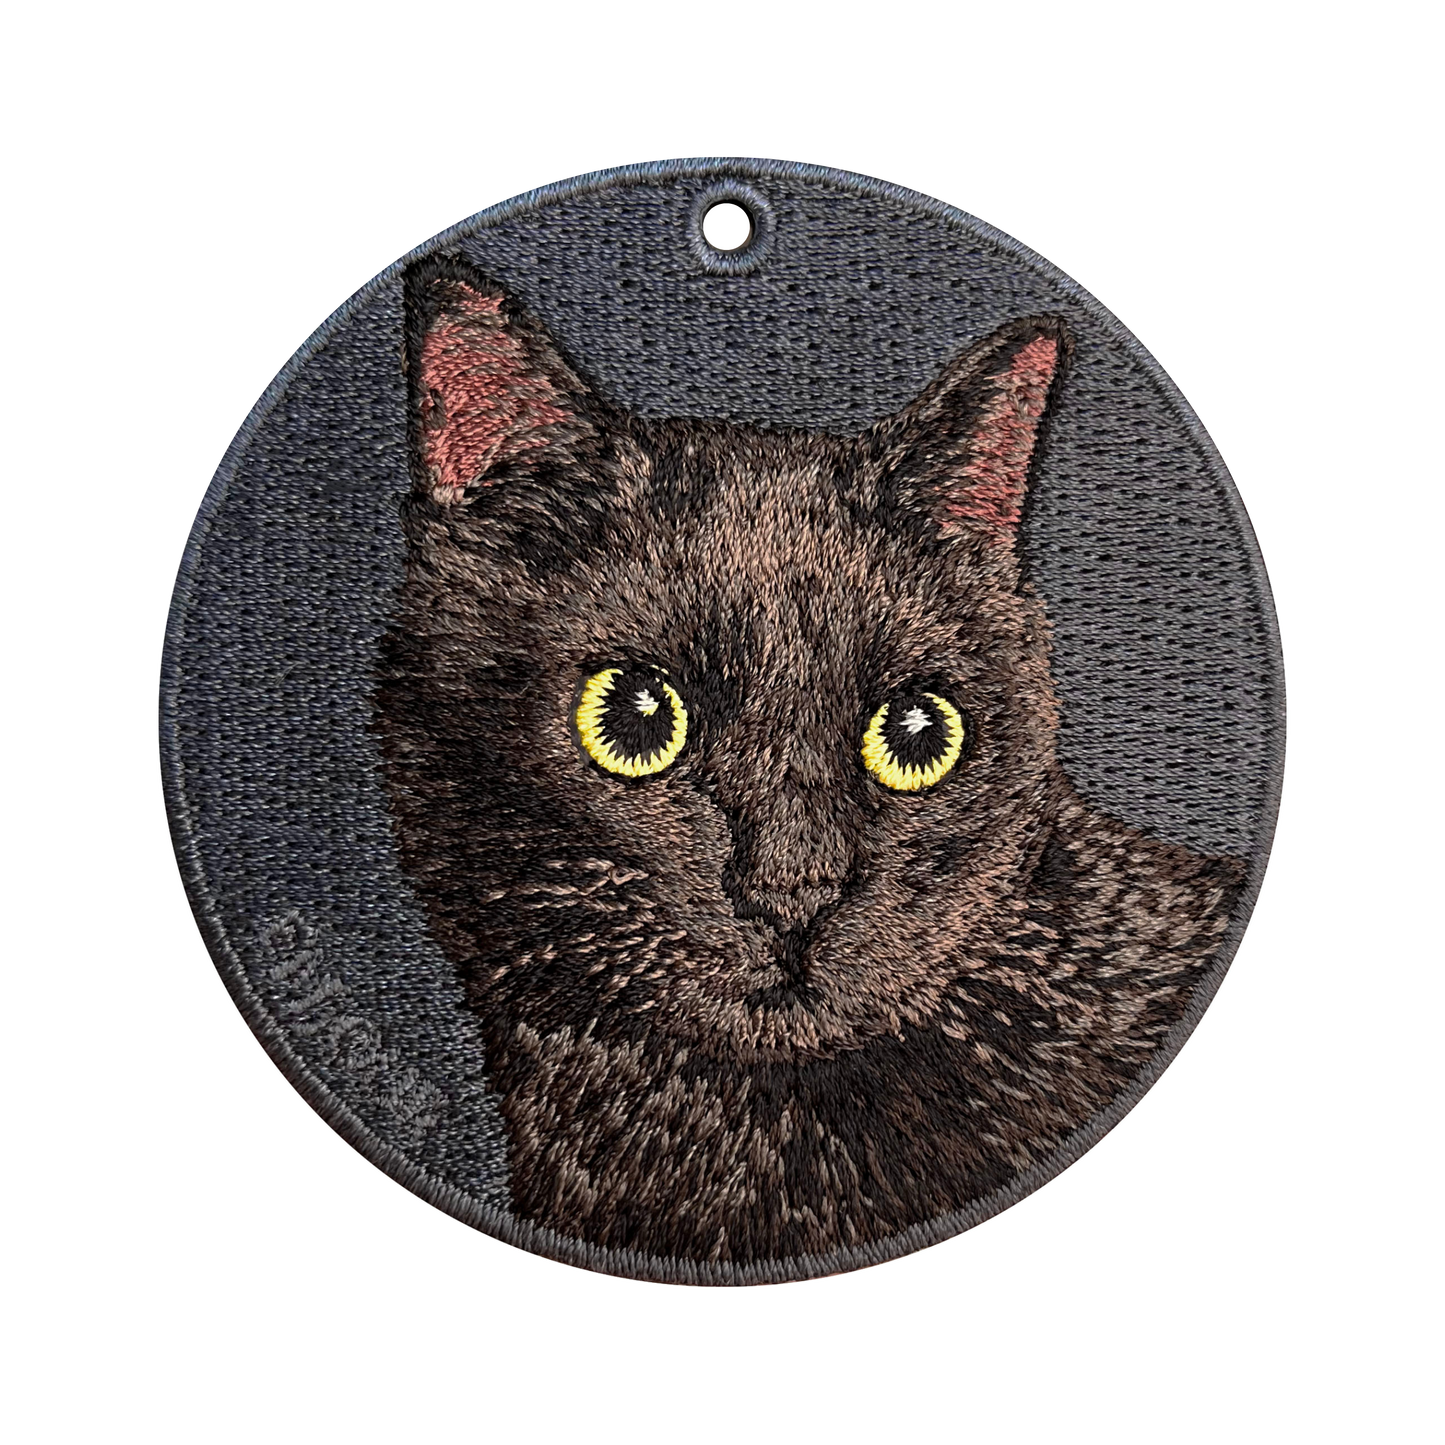 Reversible Embroidered Charm - Black Cat